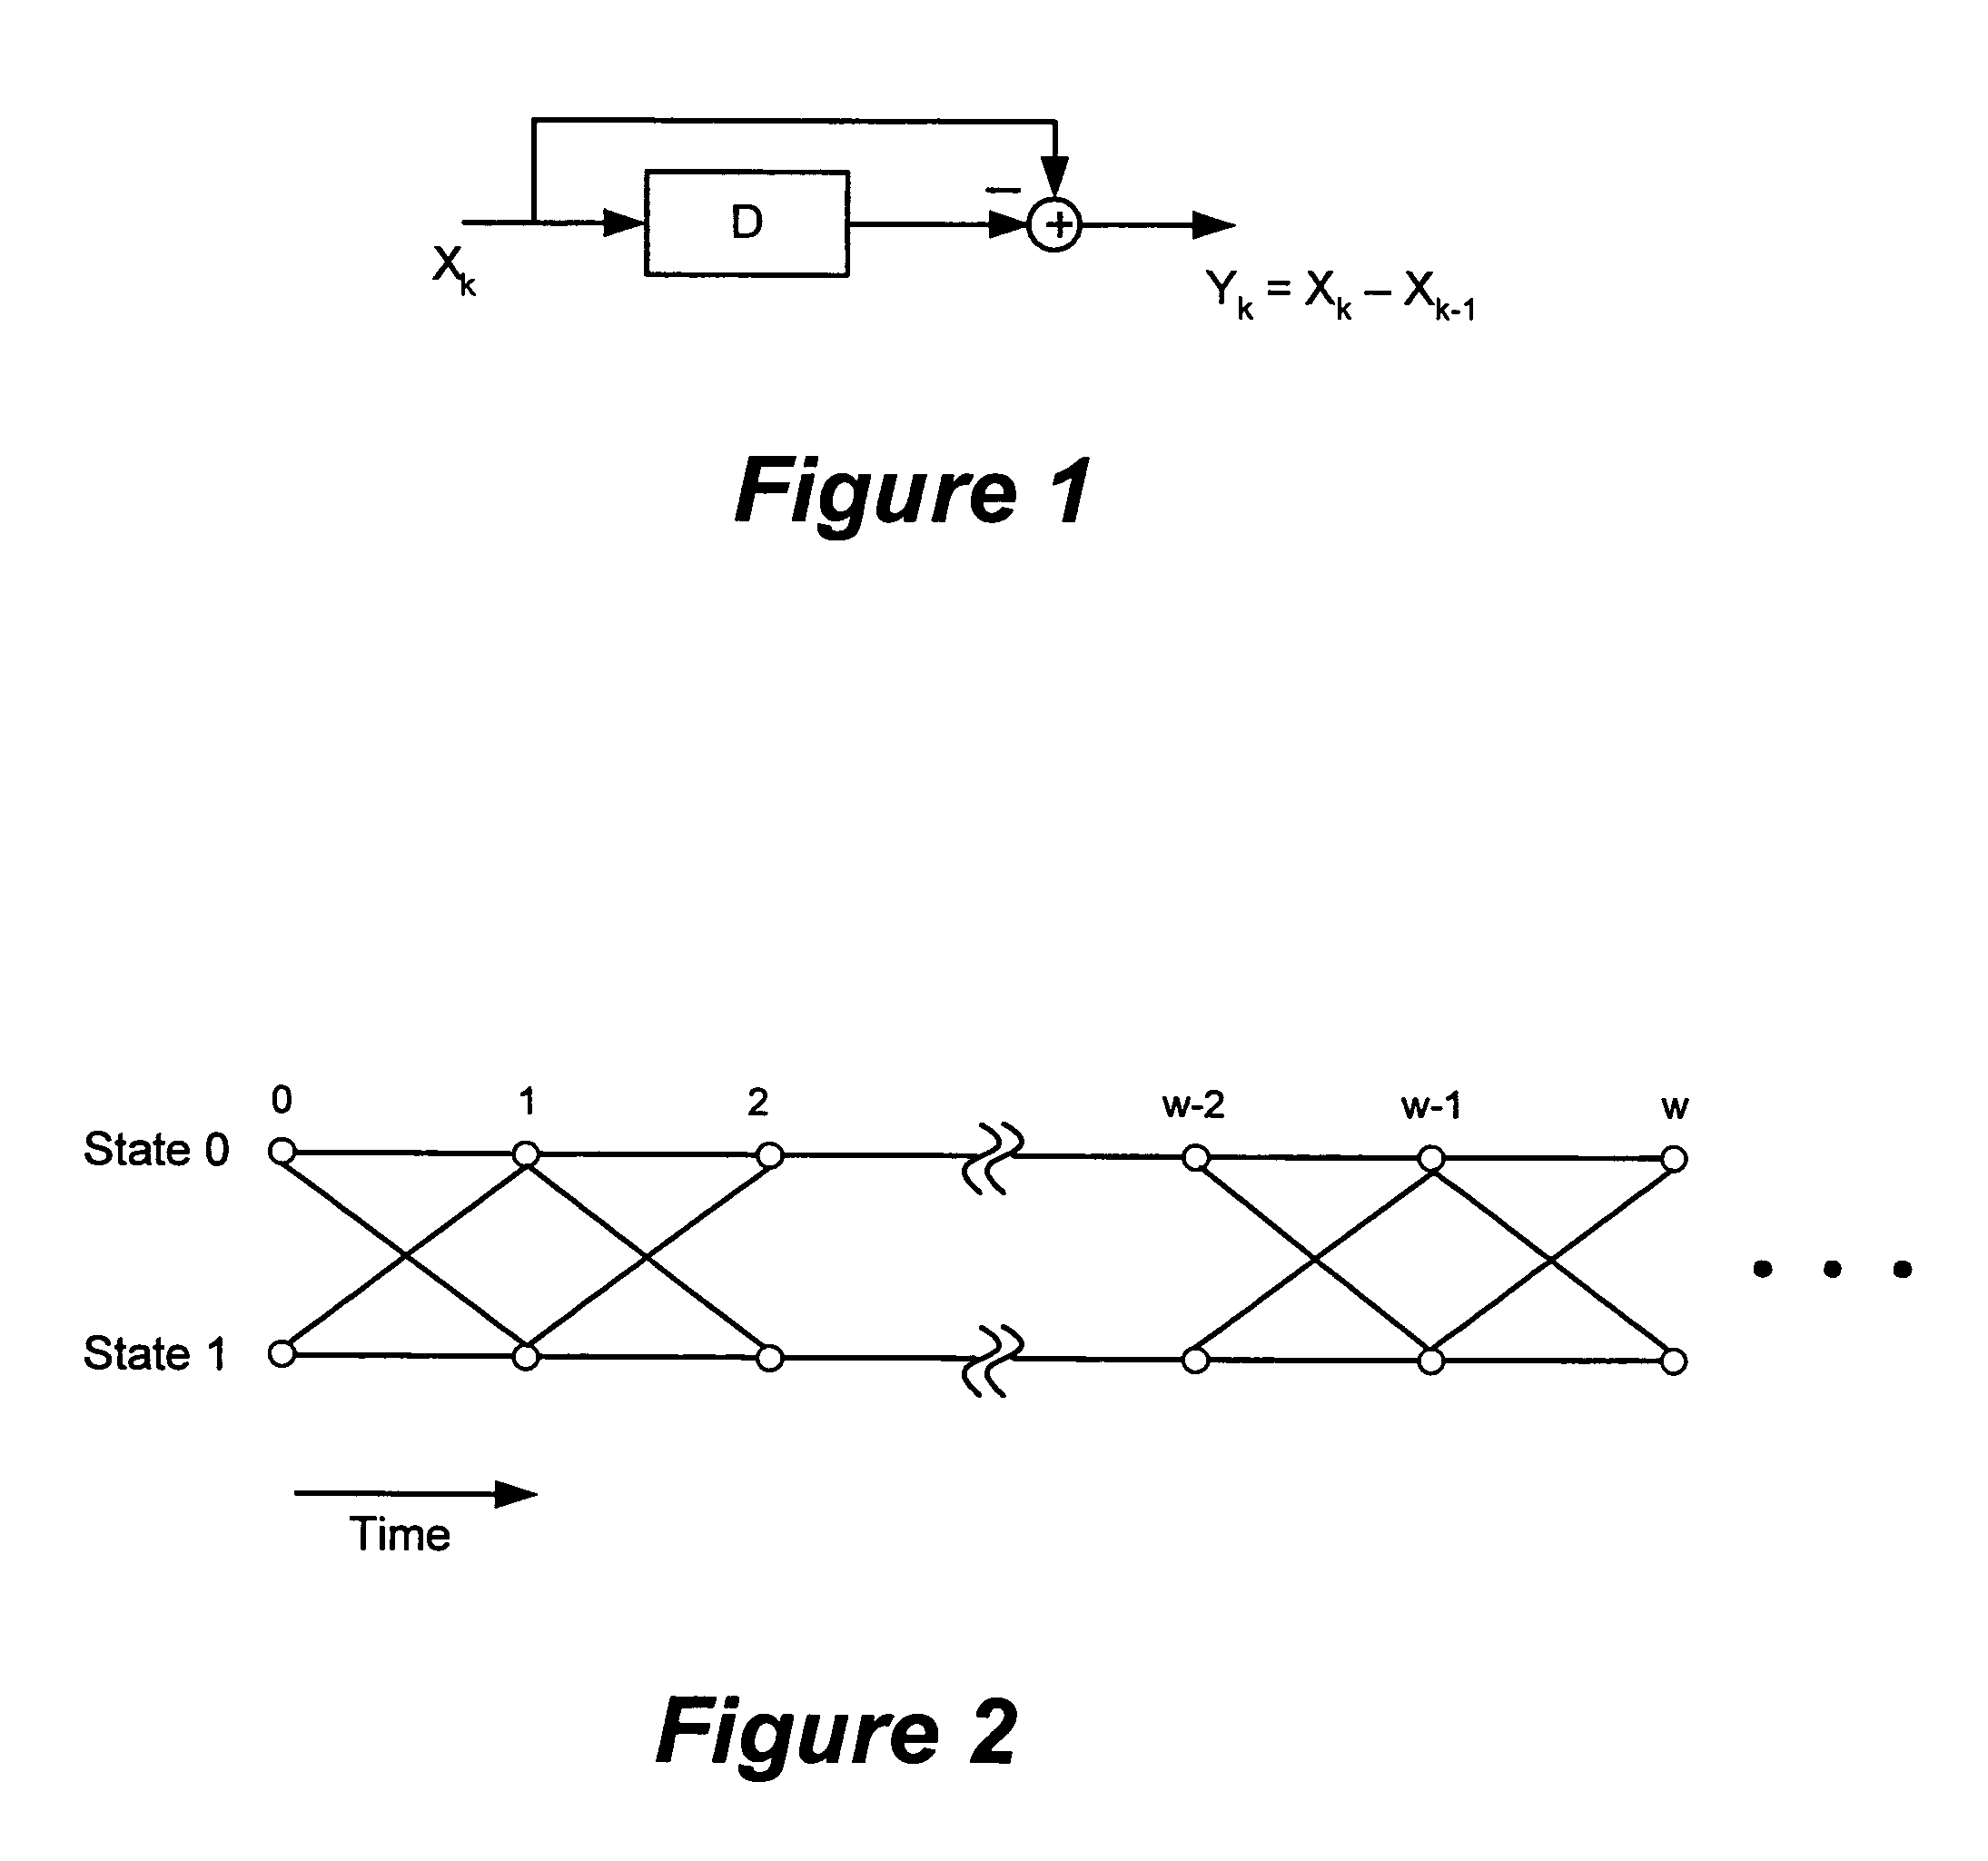 Parallel maximum a posteriori detectors with forward and reverse viterbi operators having different convergence lengths on a sampled data sequence